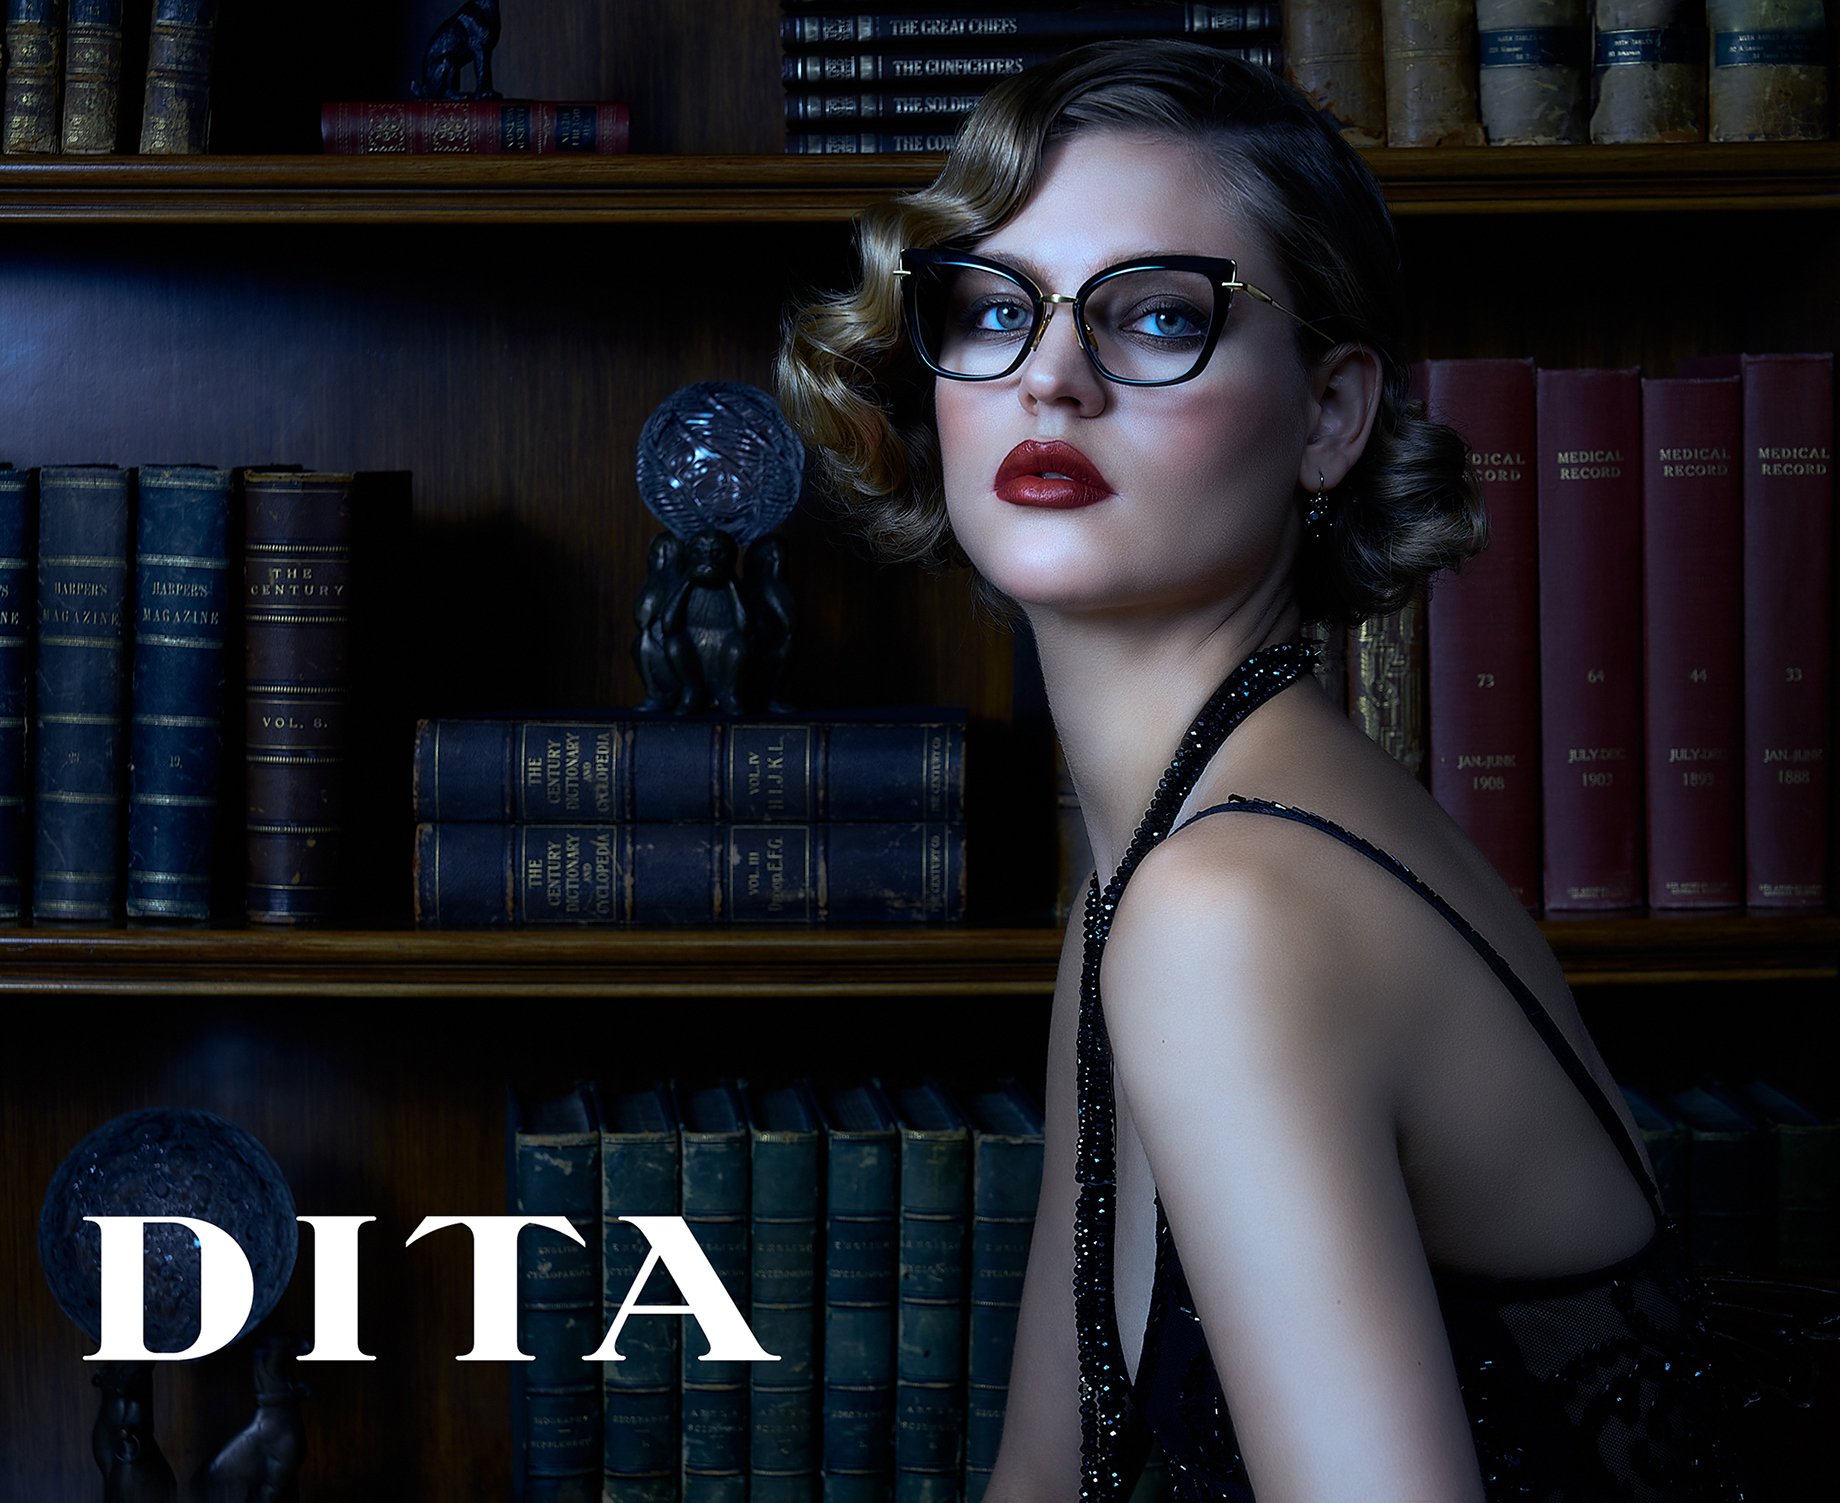 Blonde woman with hair in pin curls wearing glasses, red lipstick, and sparkly beaded black sleeveless cocktail dress sits in front of bookcase full of leather bound books shot by Greg Miles for Dita Eyewear